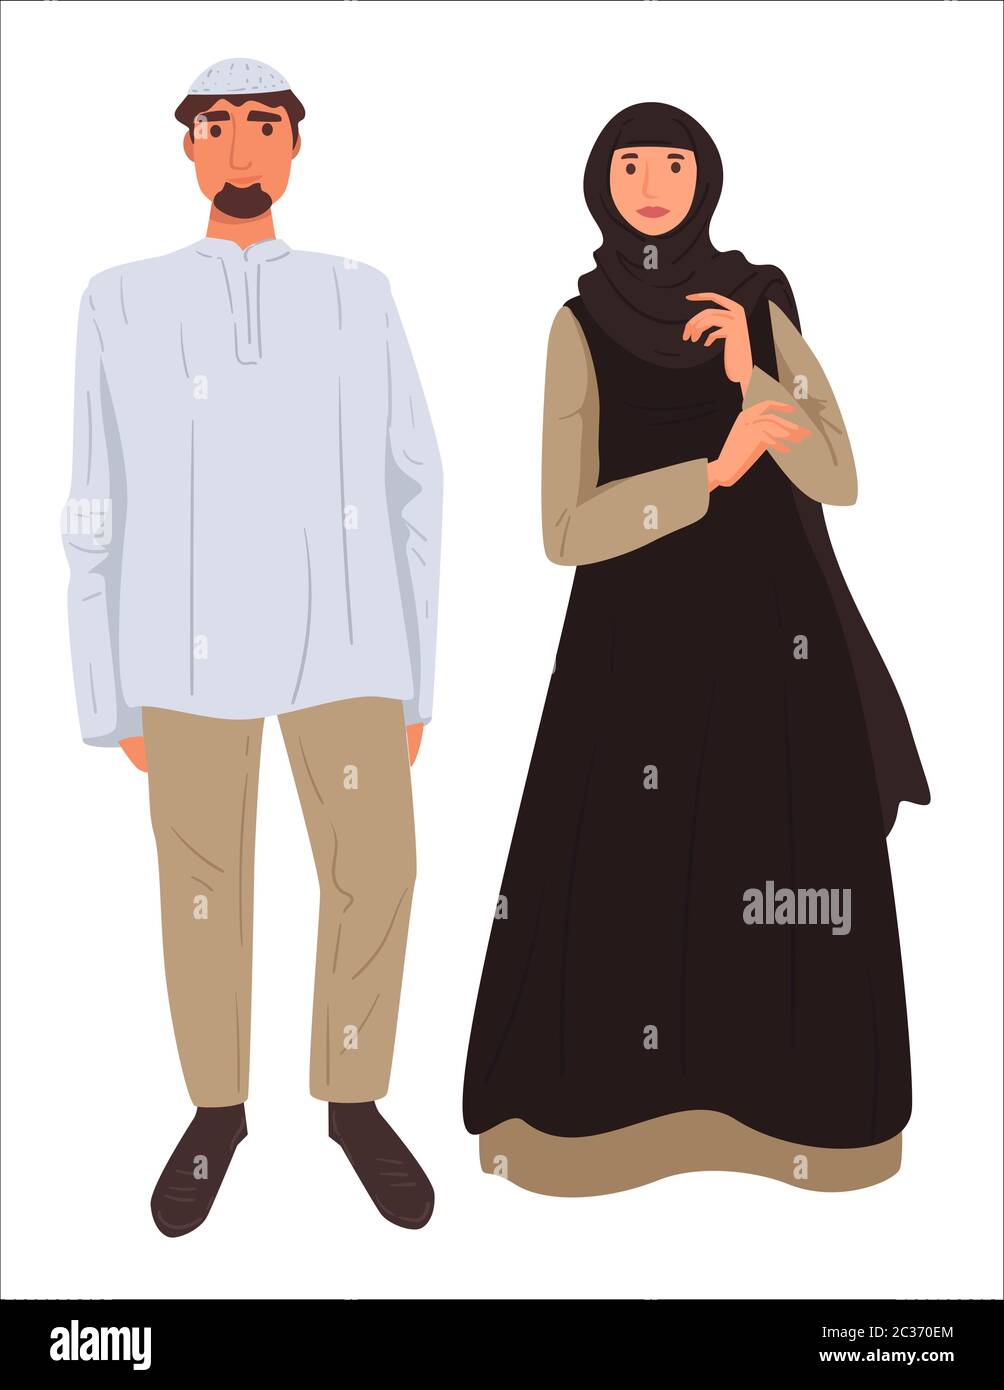 Muslim couple, man and woman wearing traditional clothes Stock Vector